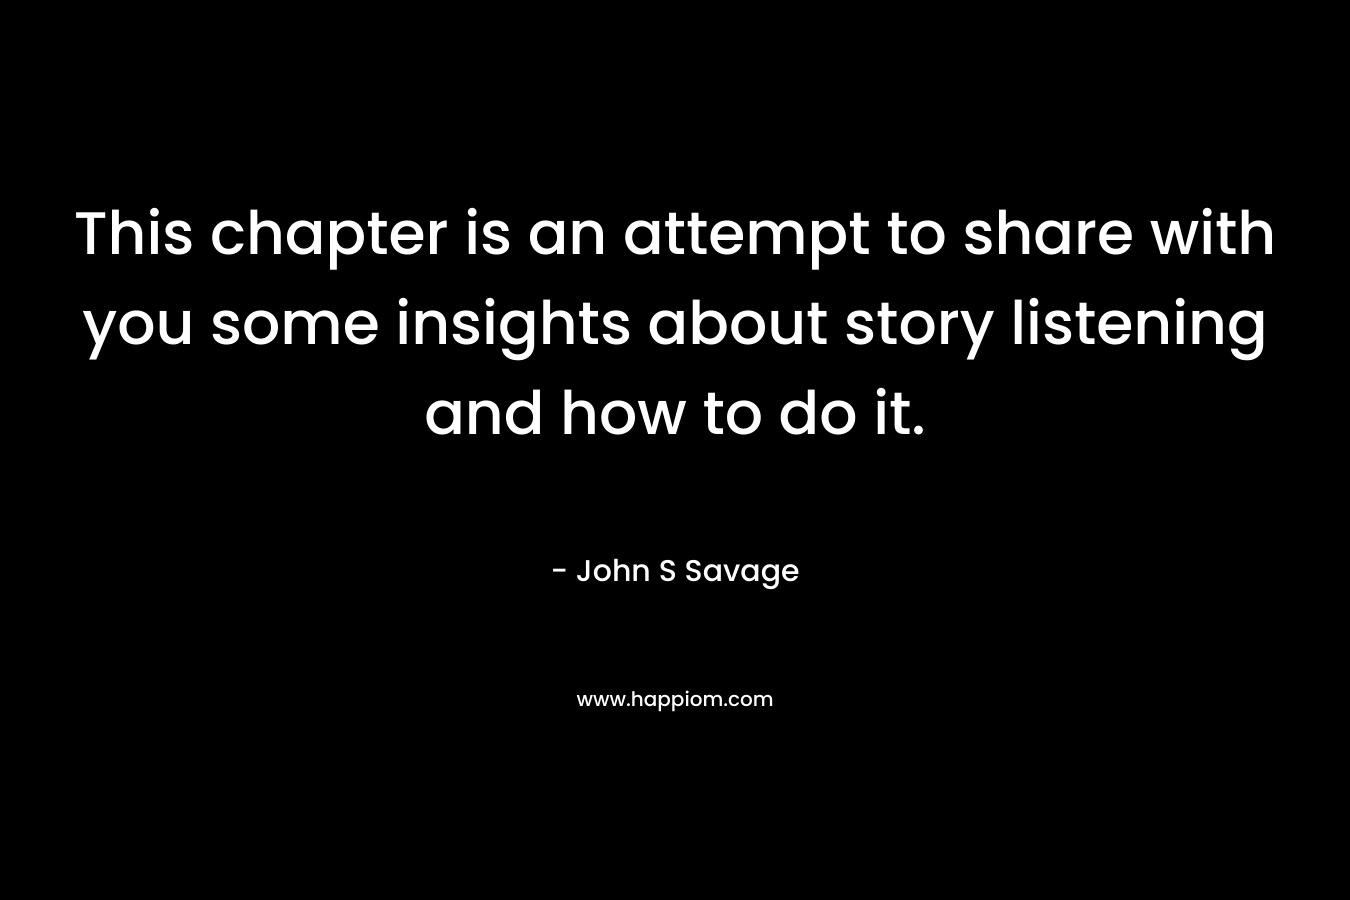 This chapter is an attempt to share with you some insights about story listening and how to do it. – John S Savage